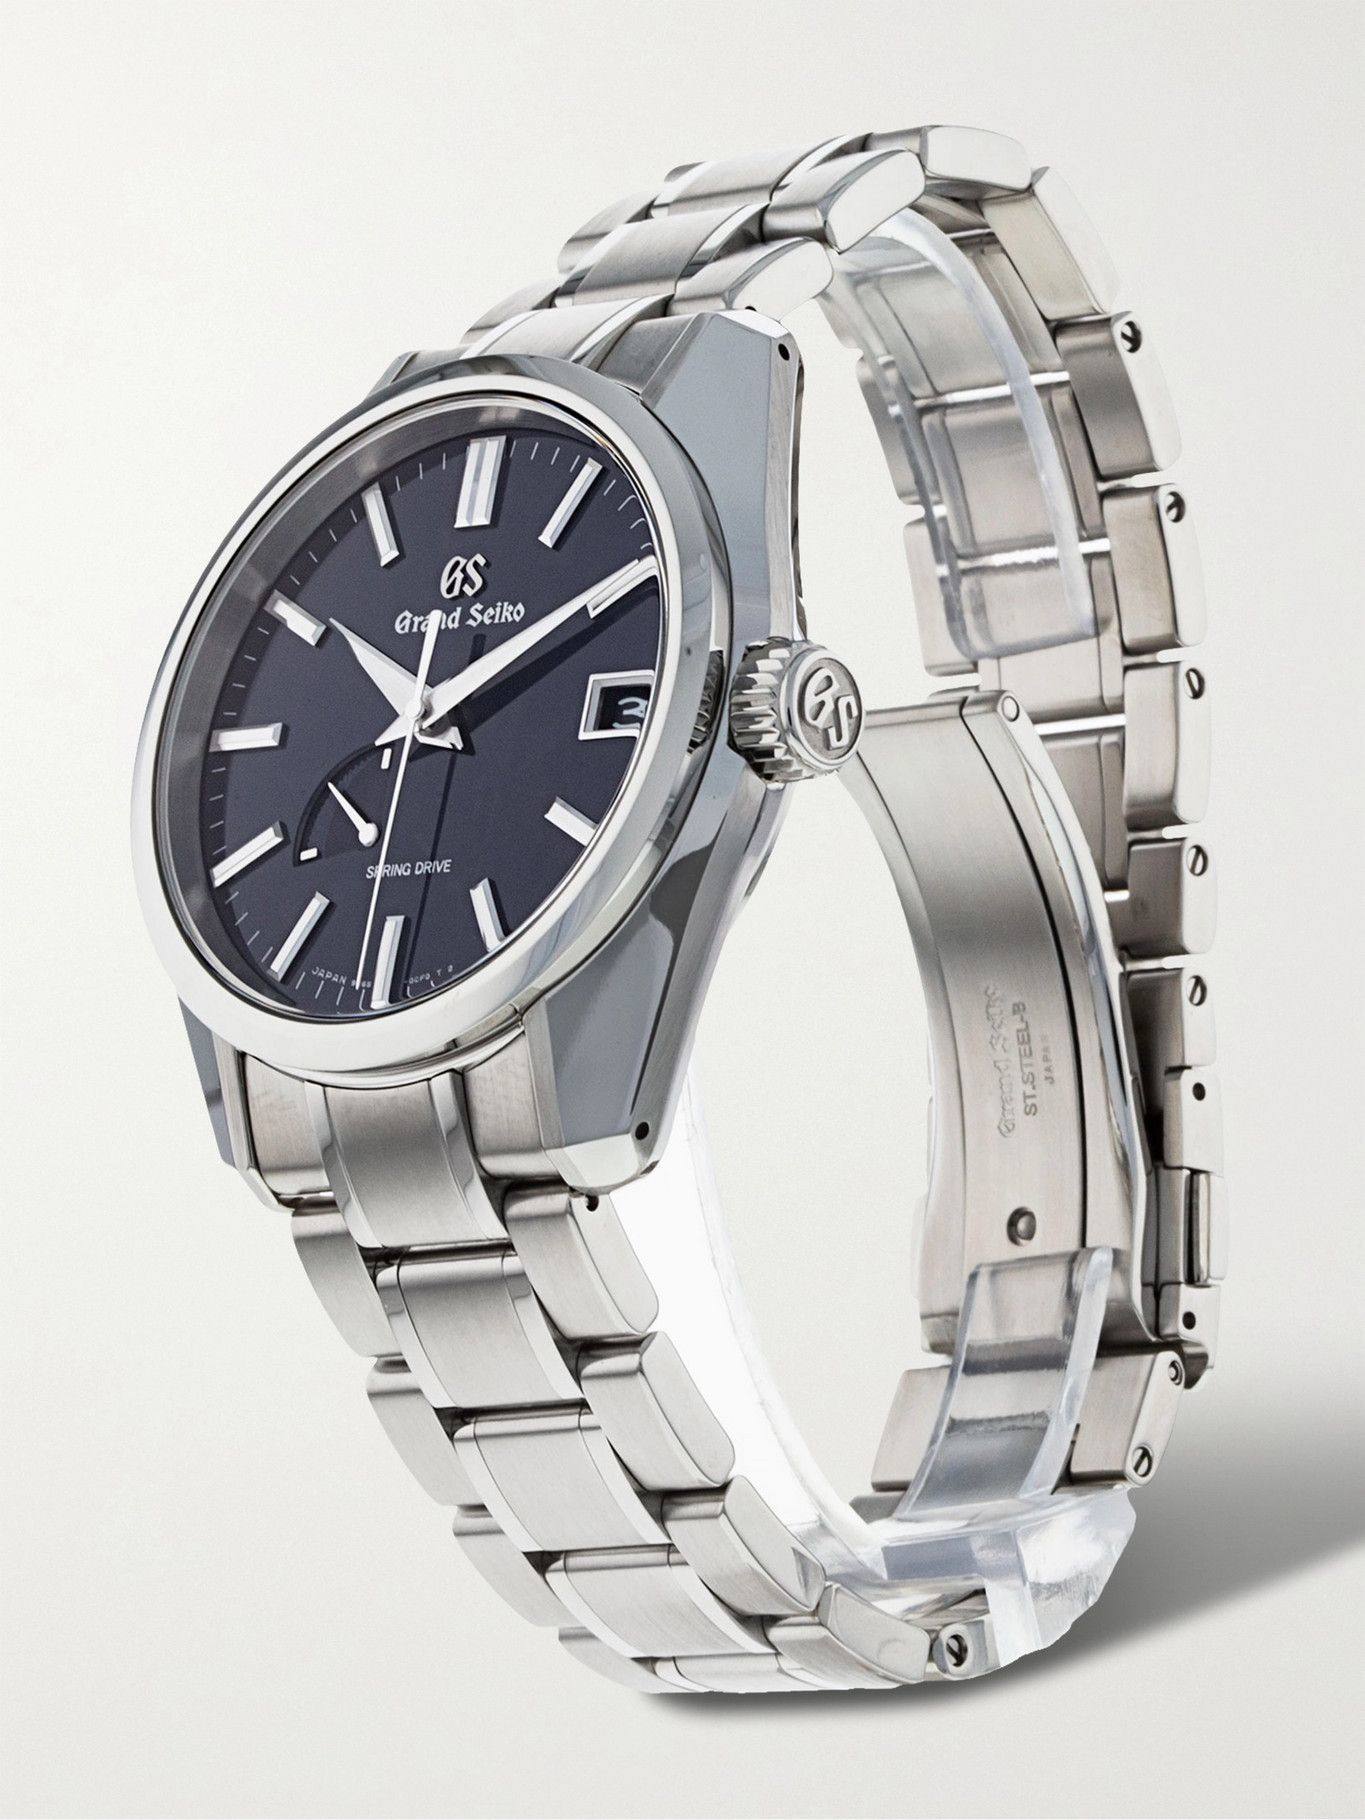 Grand Seiko - Pre-Owned 2020 Heritage Automatic 40mm Stainless Steel Watch,  Ref. No. SBGA375 Grand Seiko